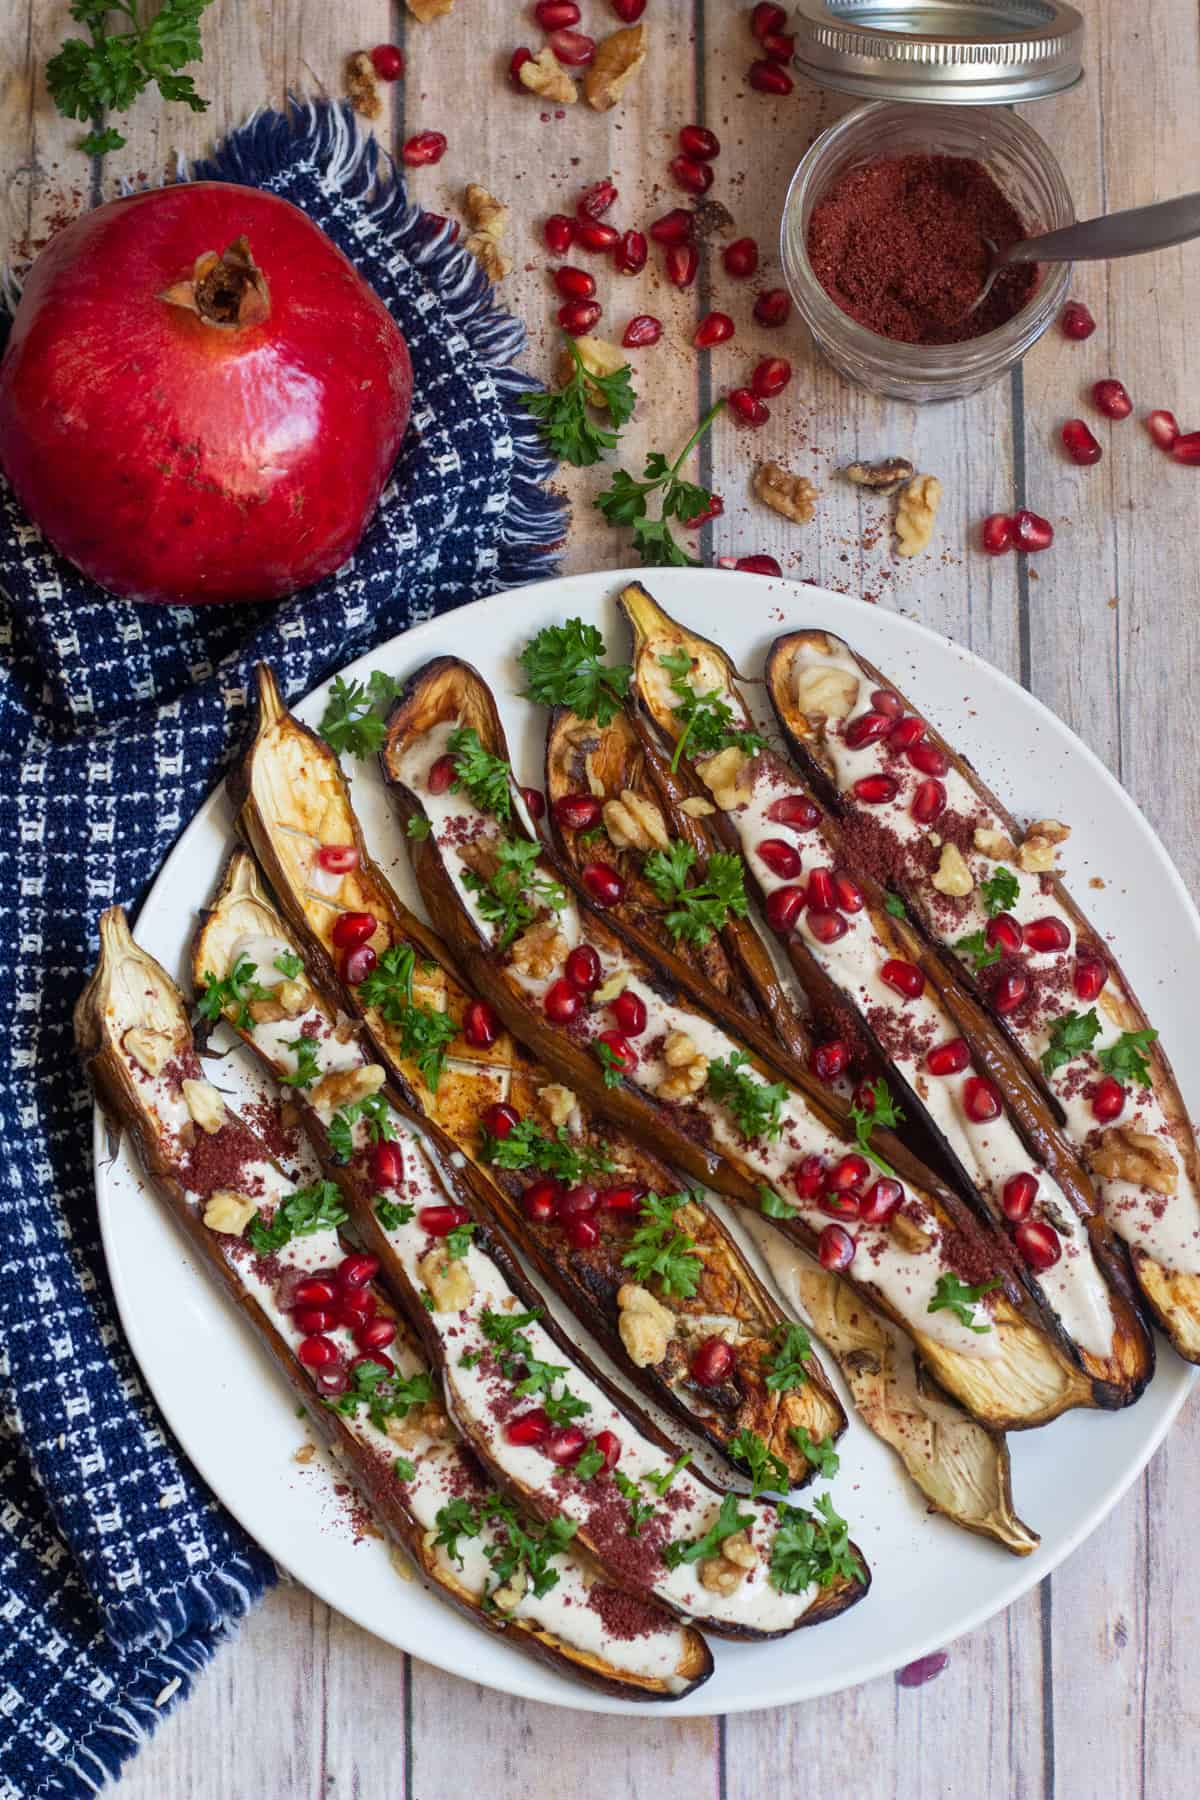 This is a Middle Eastern Eggplant Recipe to always have close at hand. It's served with a stunning tahini yogurt sauce and pomegranate arils, perfect as a side dish or an impressive appetizer!